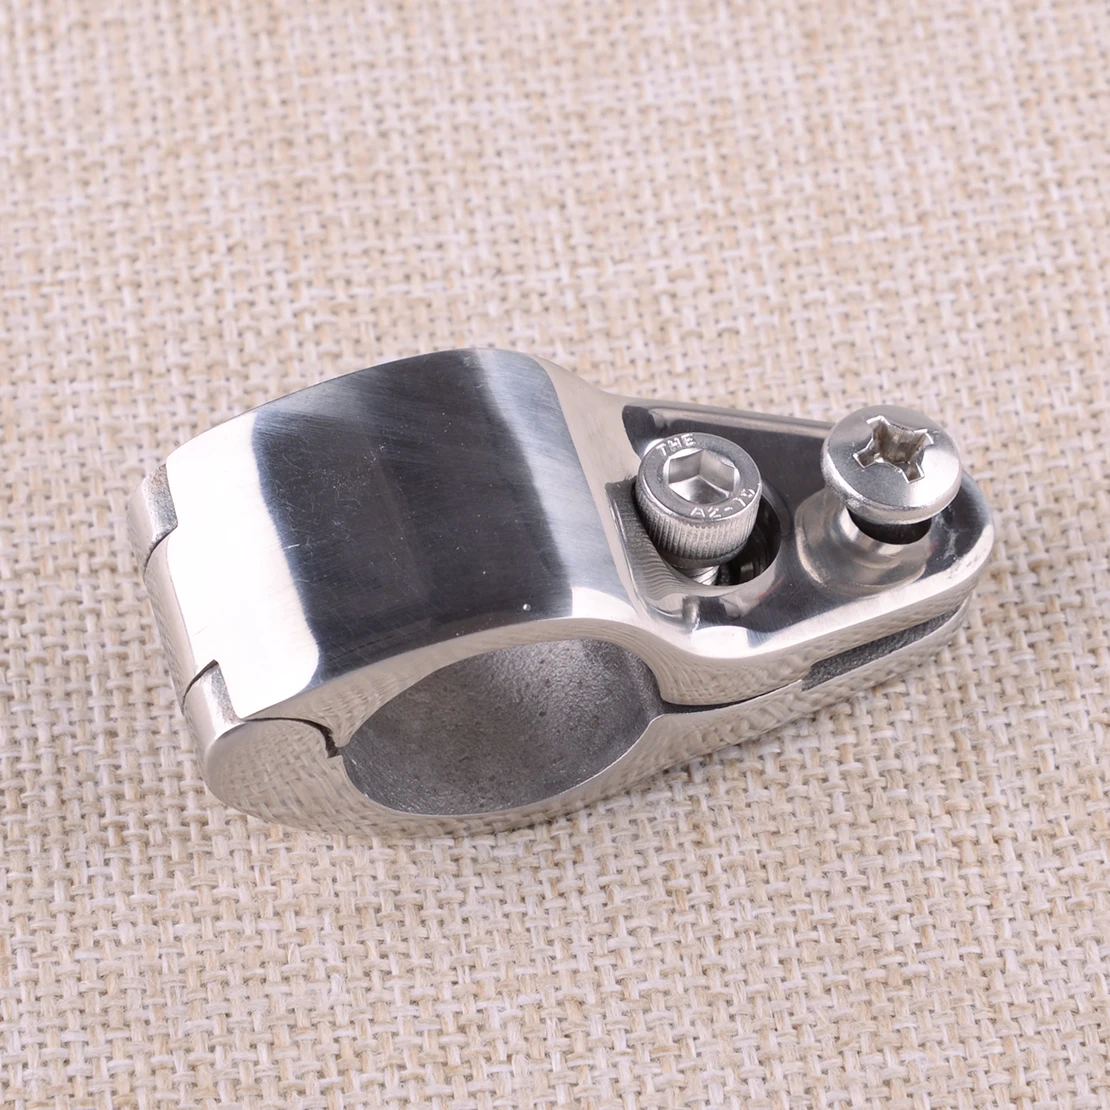 

1" 25mm Boat Yacht Bimini Top Fitting Hinged Jaw Slide Marine Hardware Silver Stainless Steel